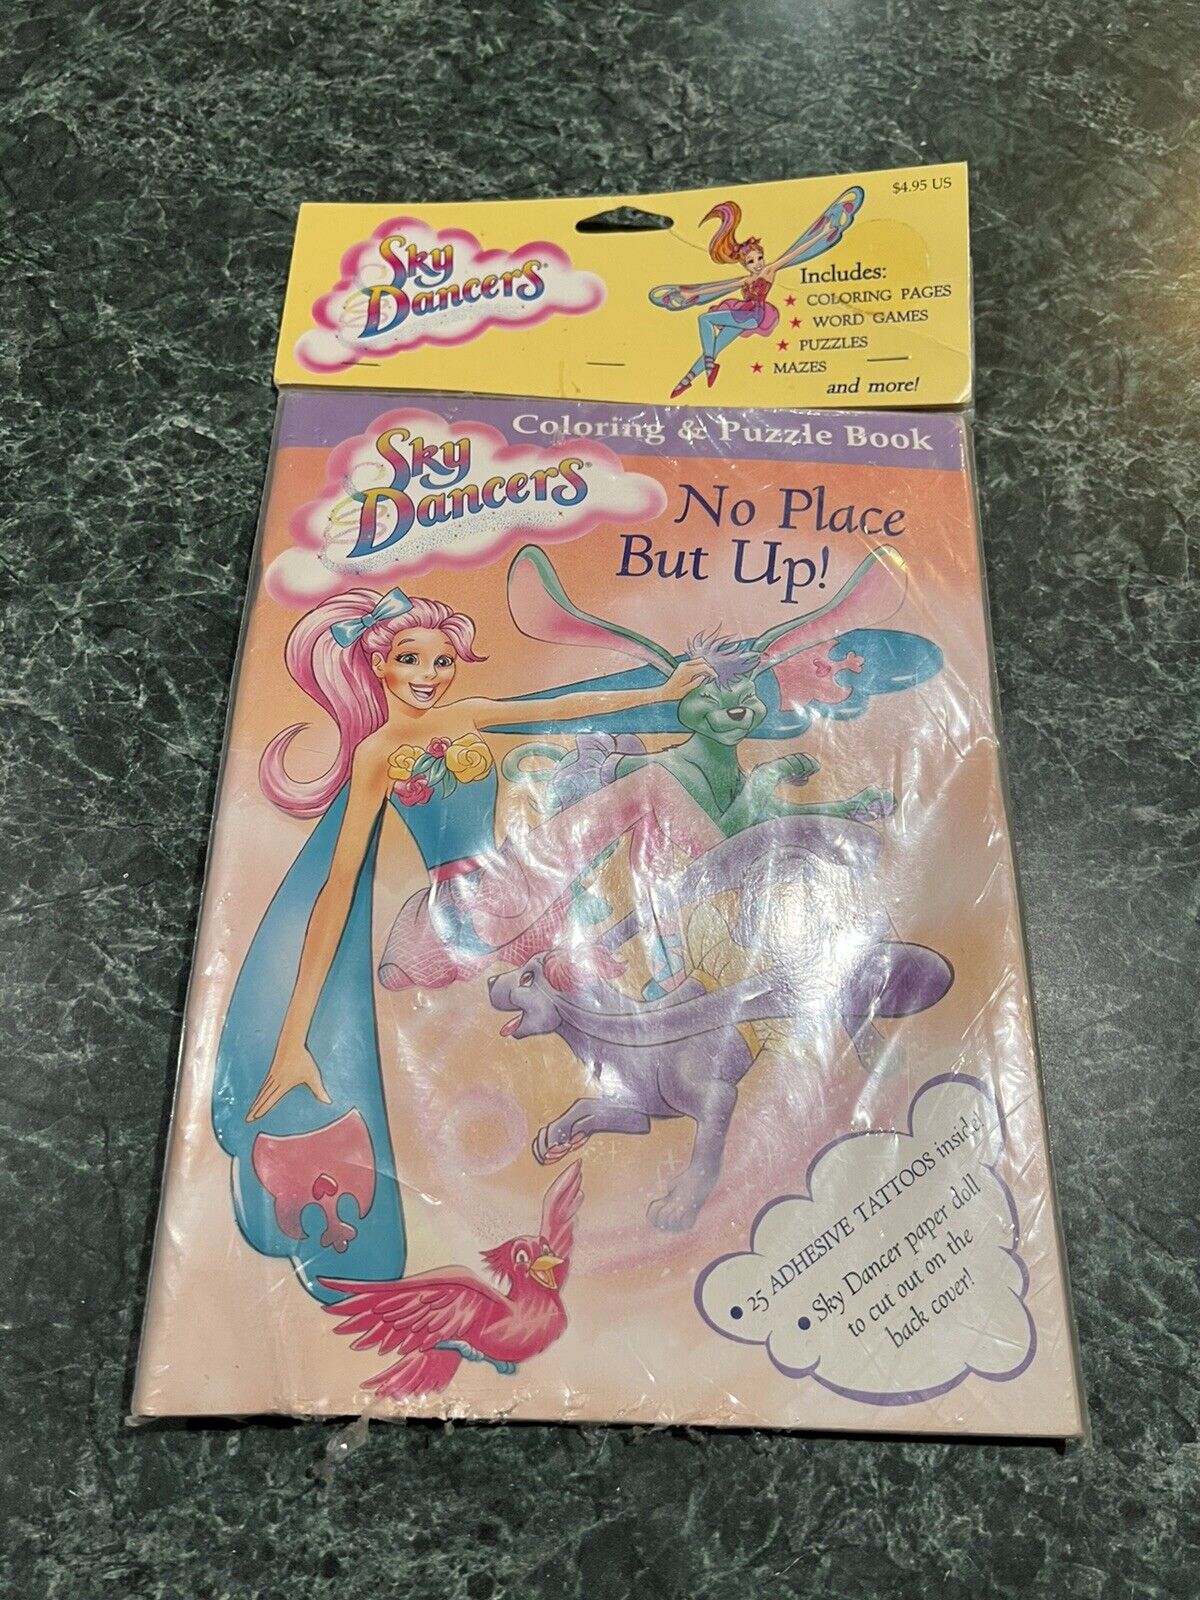 Vintage 90’s Sky Dancers “No Place But Up” Coloring & Puzzle Book *New Old Stock